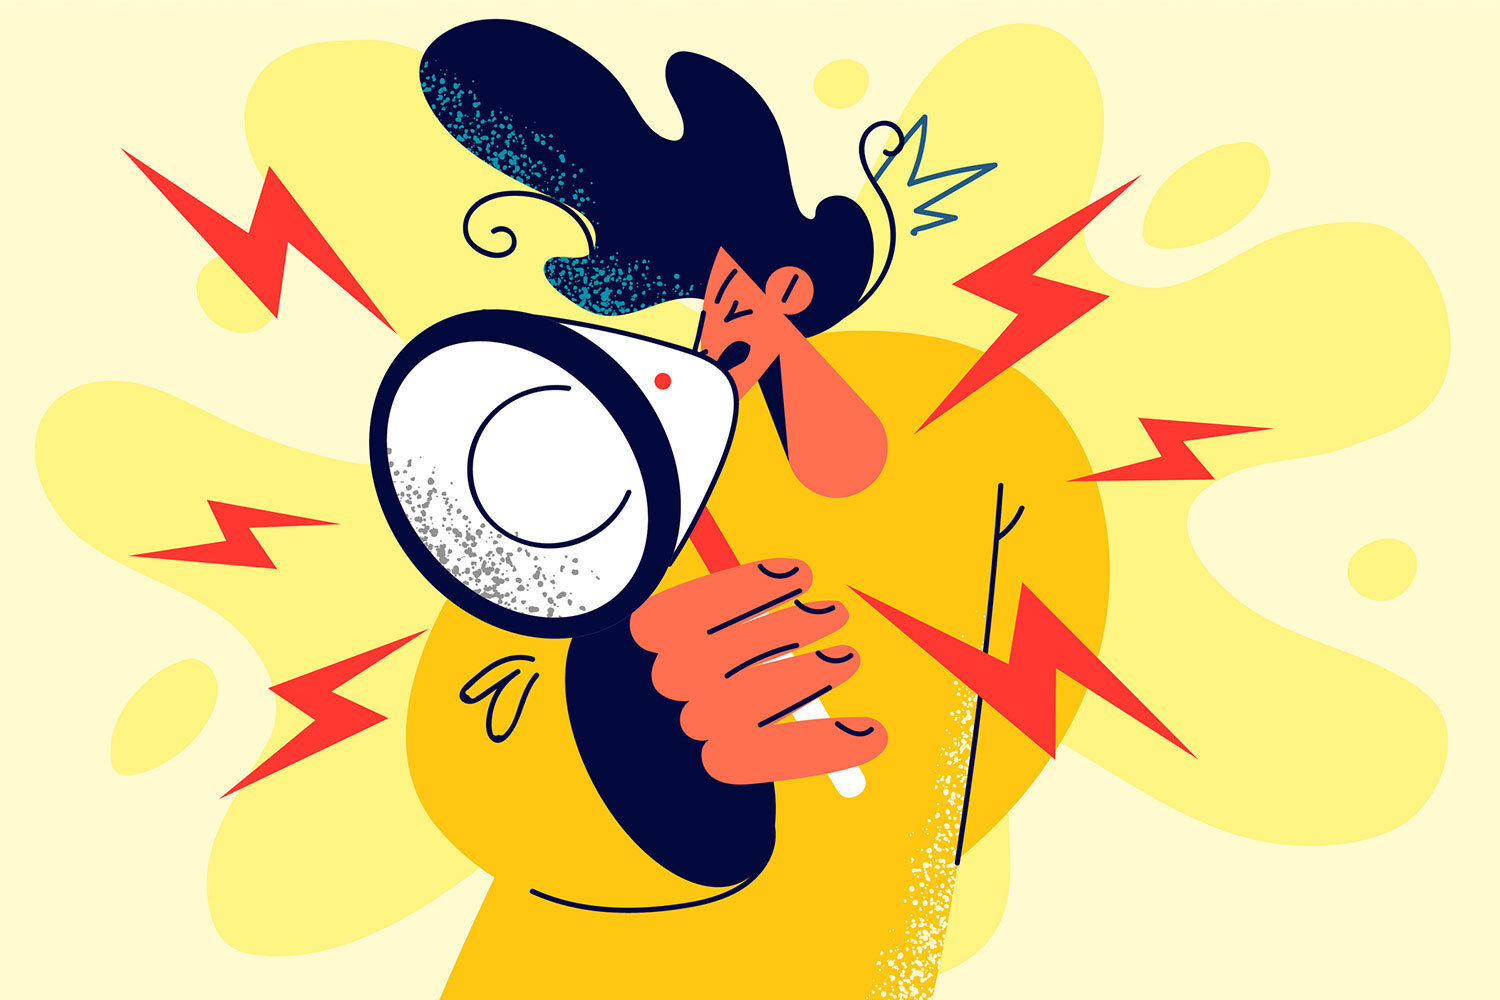 An illustration of a woman screaming into a megaphone